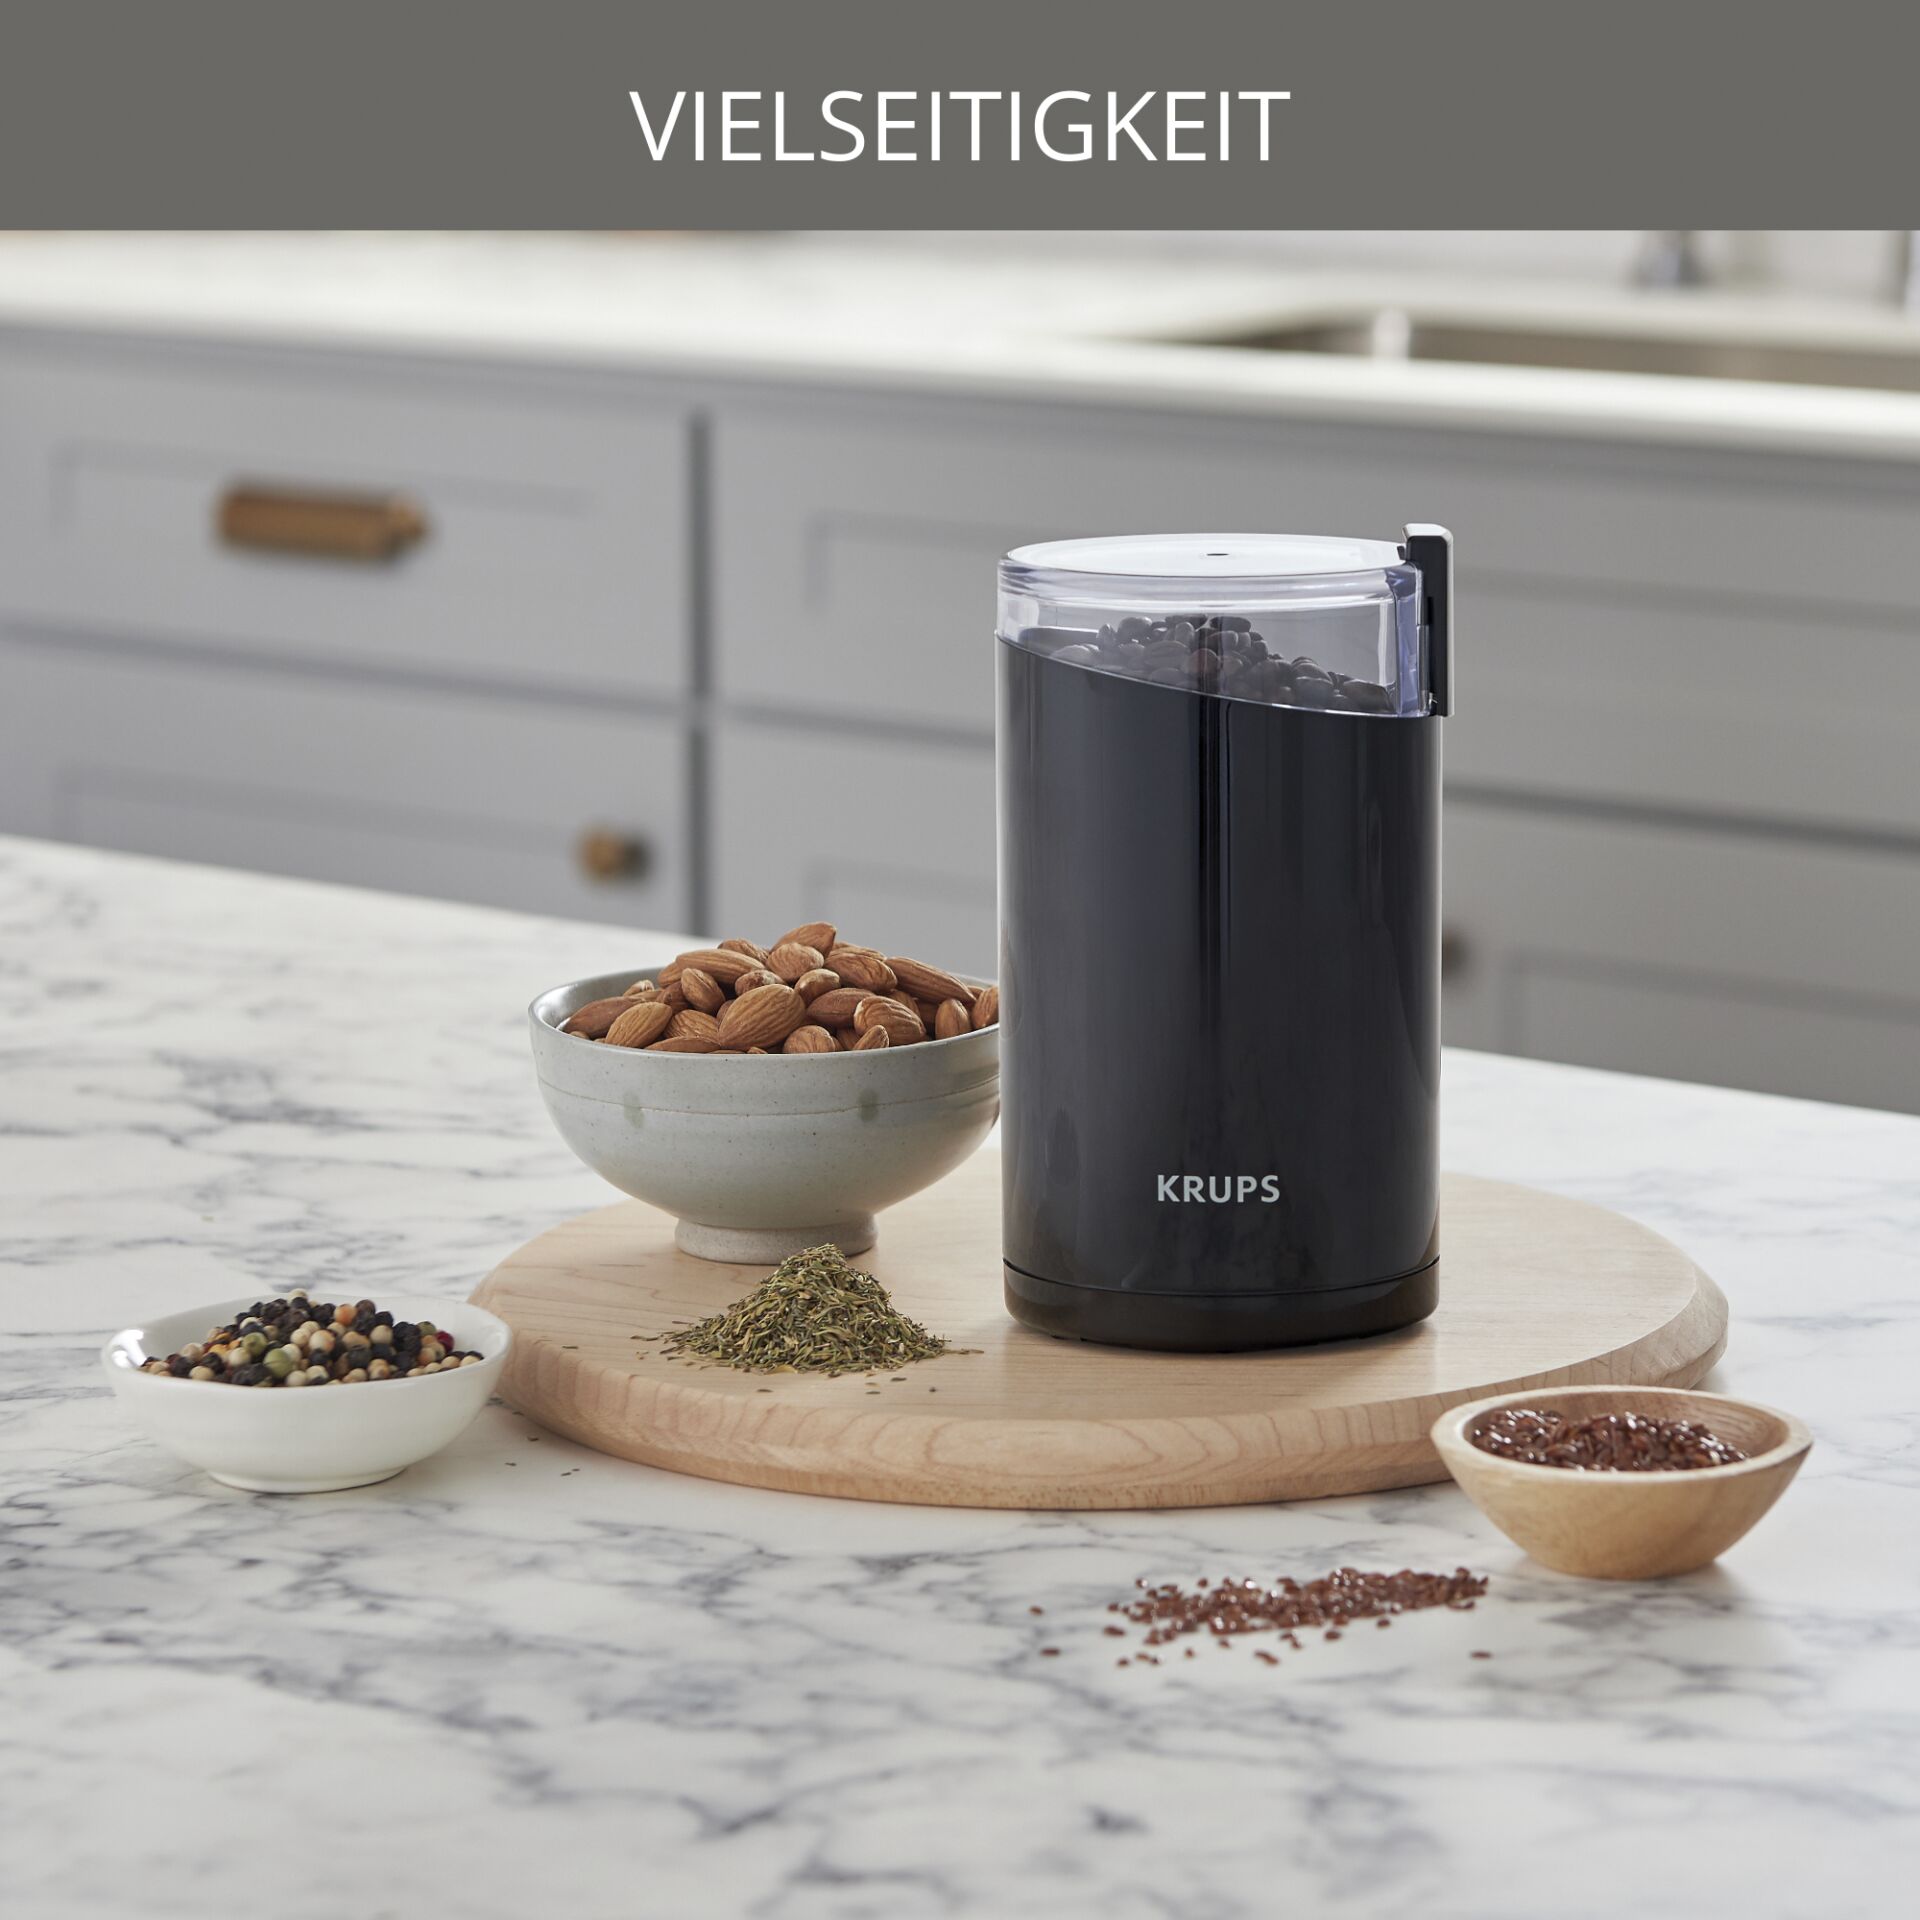 Fast Touch Coffee Grinder (F20342), Krups